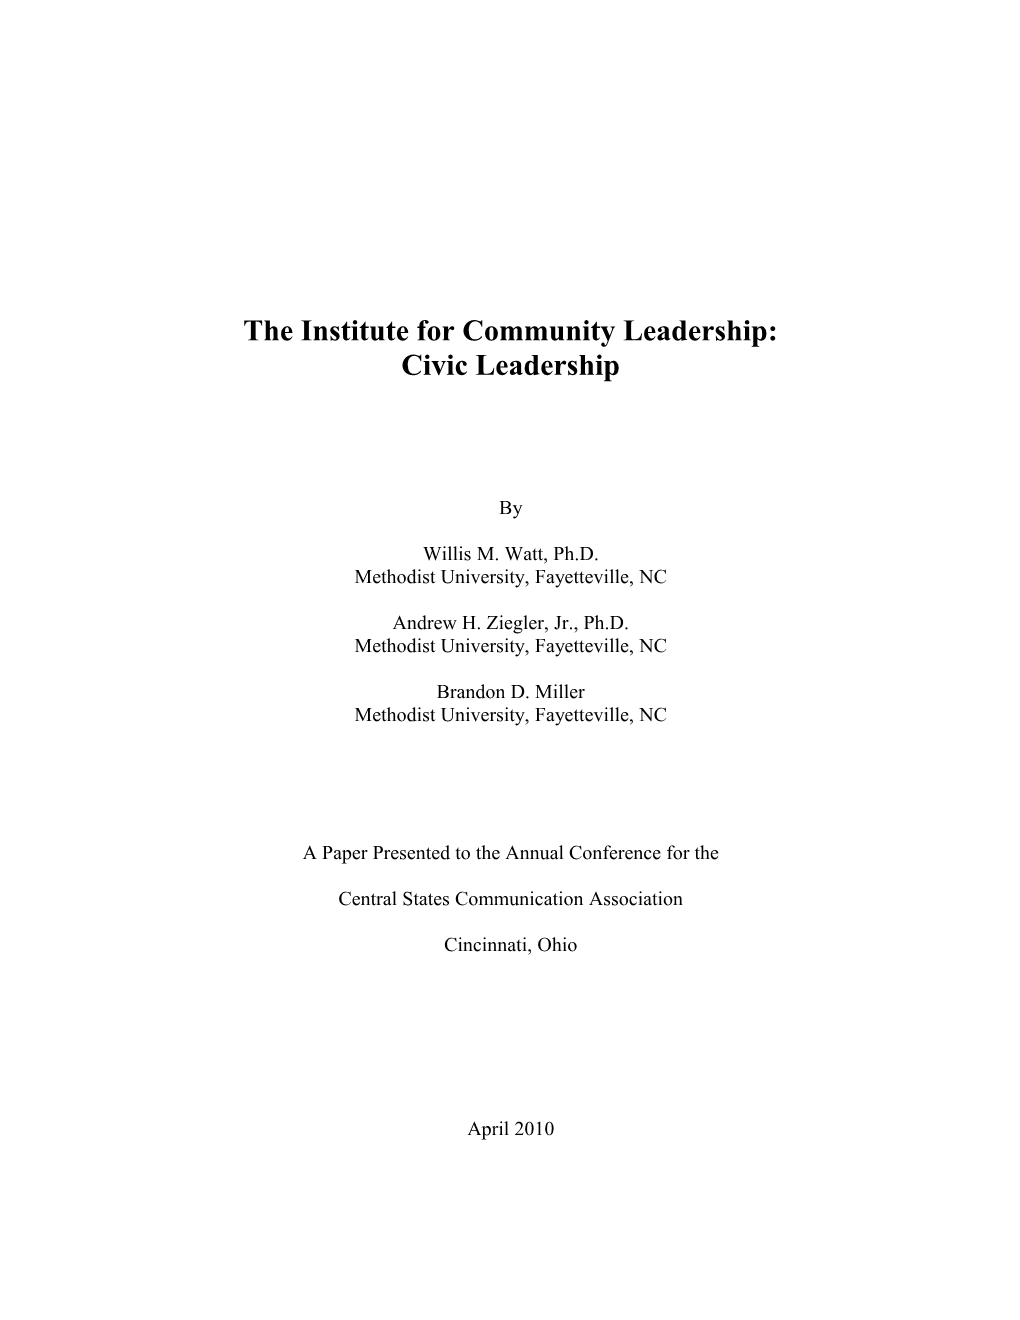 ICL Empowering Community Members for Civic Leadership